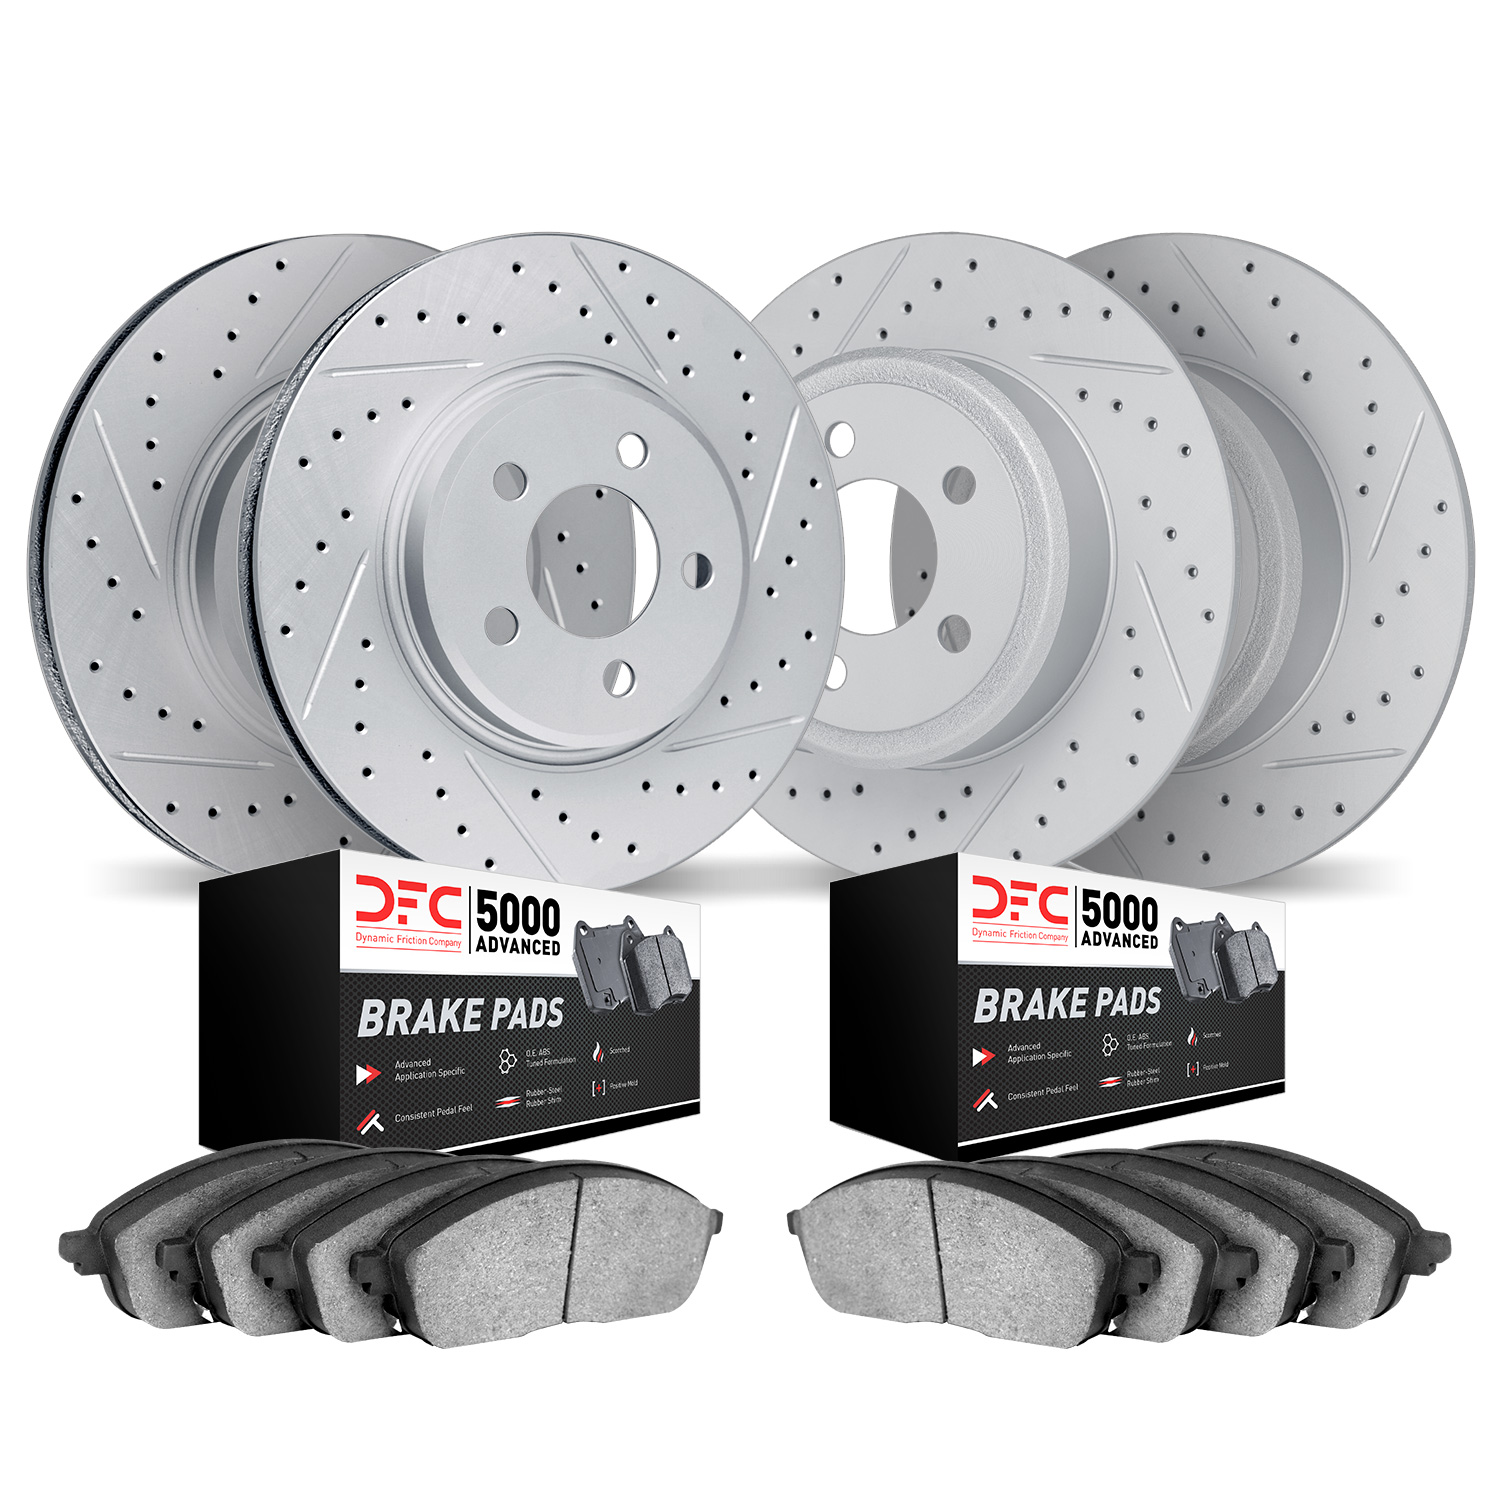 2504-80018 Geoperformance Drilled/Slotted Rotors w/5000 Advanced Brake Pads Kit, 2007-2013 Ford/Lincoln/Mercury/Mazda, Position: